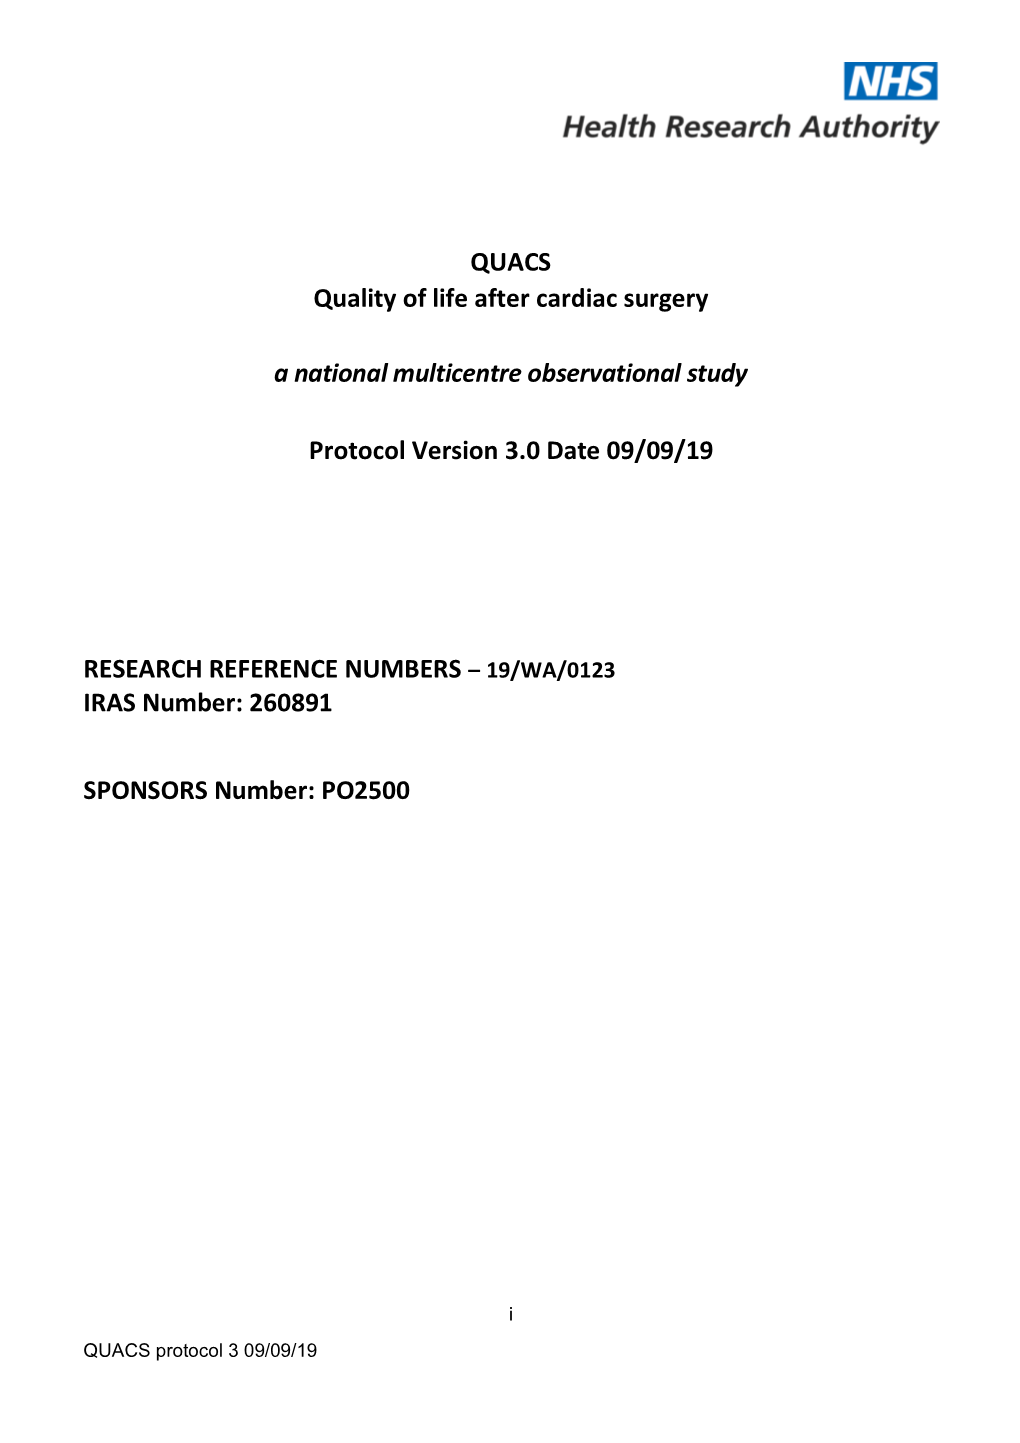 QUACS Quality of Life After Cardiac Surgery a National Multicentre